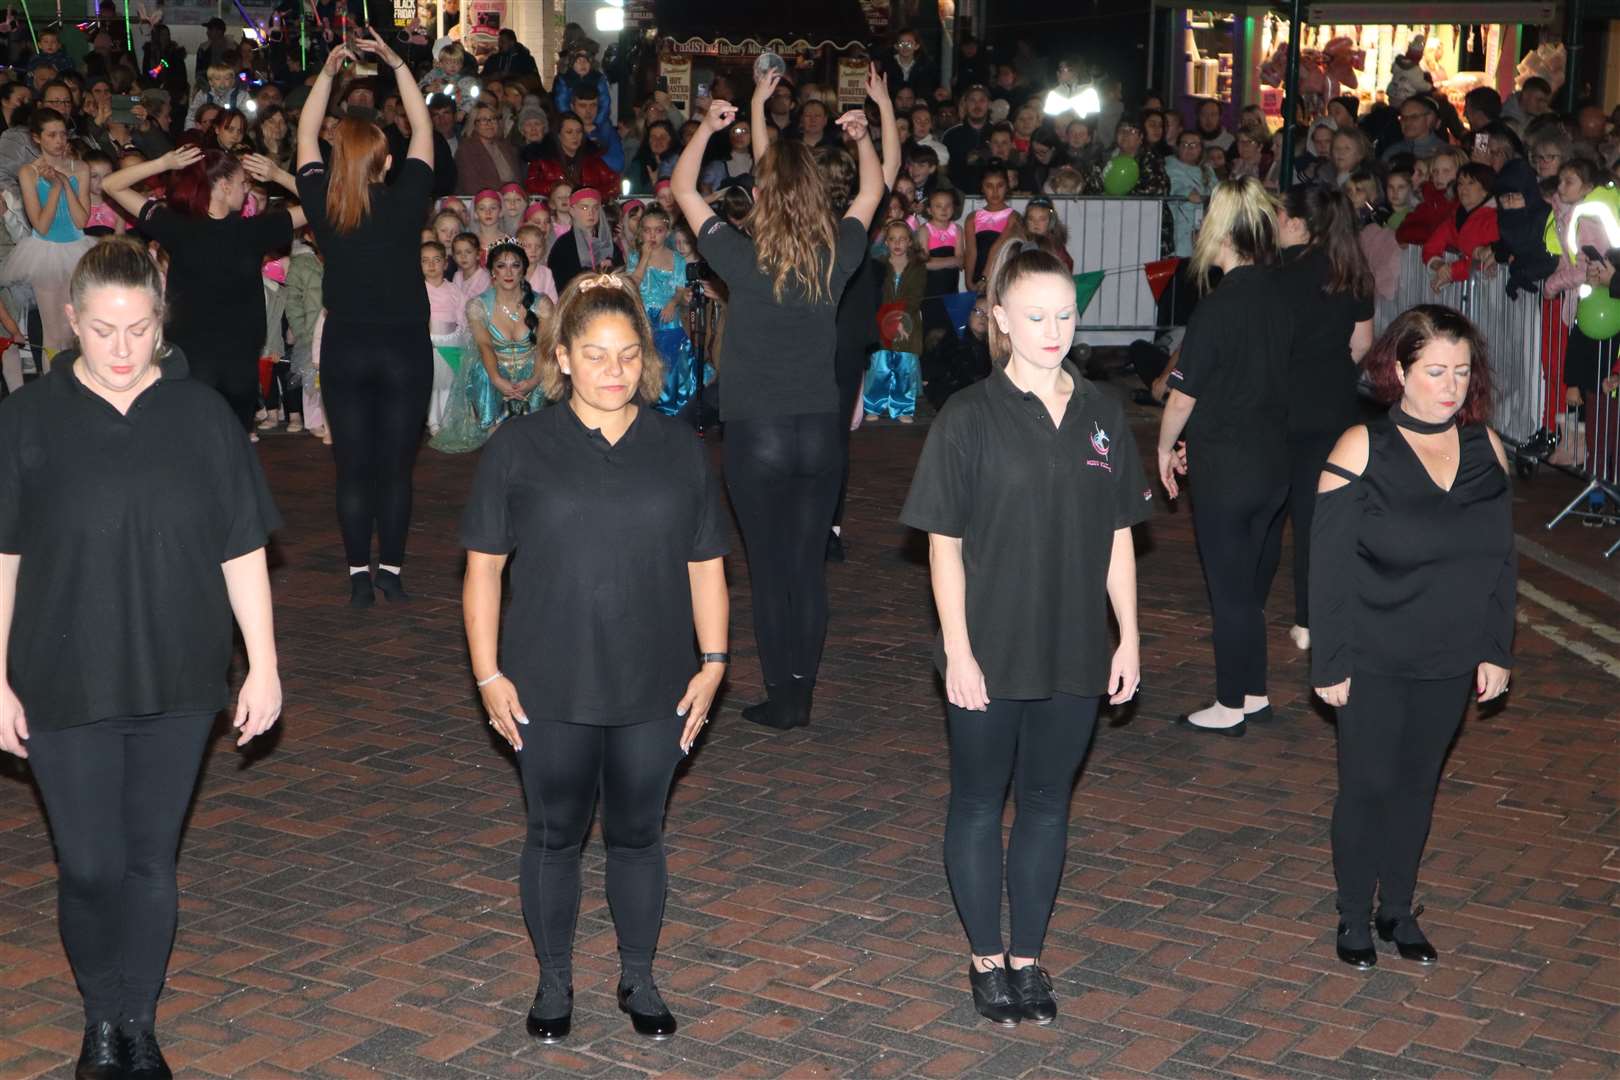 Irish dancers from Kayleigh Carena Performing Arts at the Sittingbourne Christmas lights switch-on